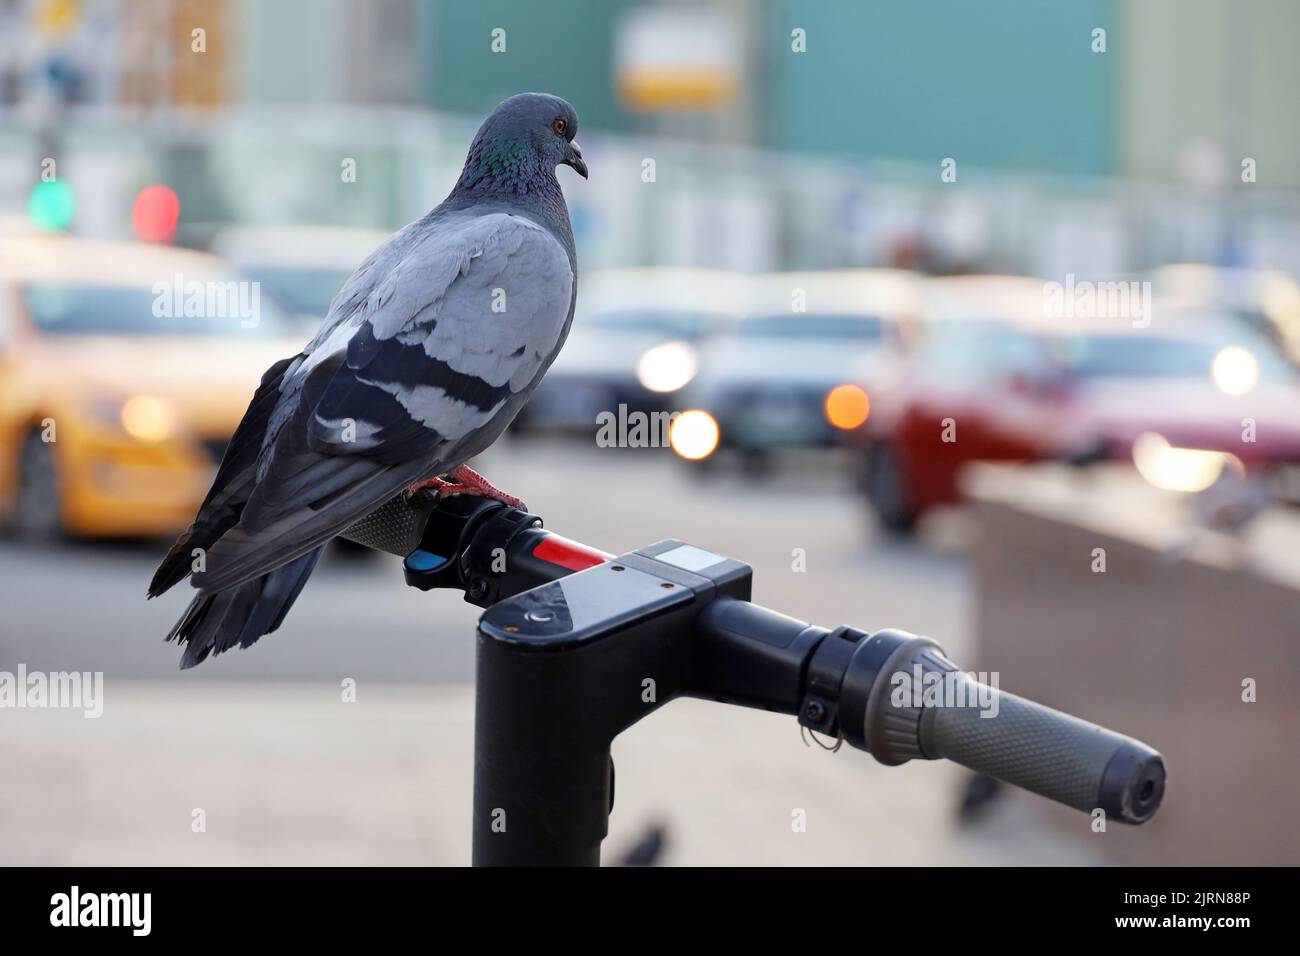 Pigeon sit on handlebar of electric scooters on city street. Dove on blurred cars background, e-scooters rental Stock Photo